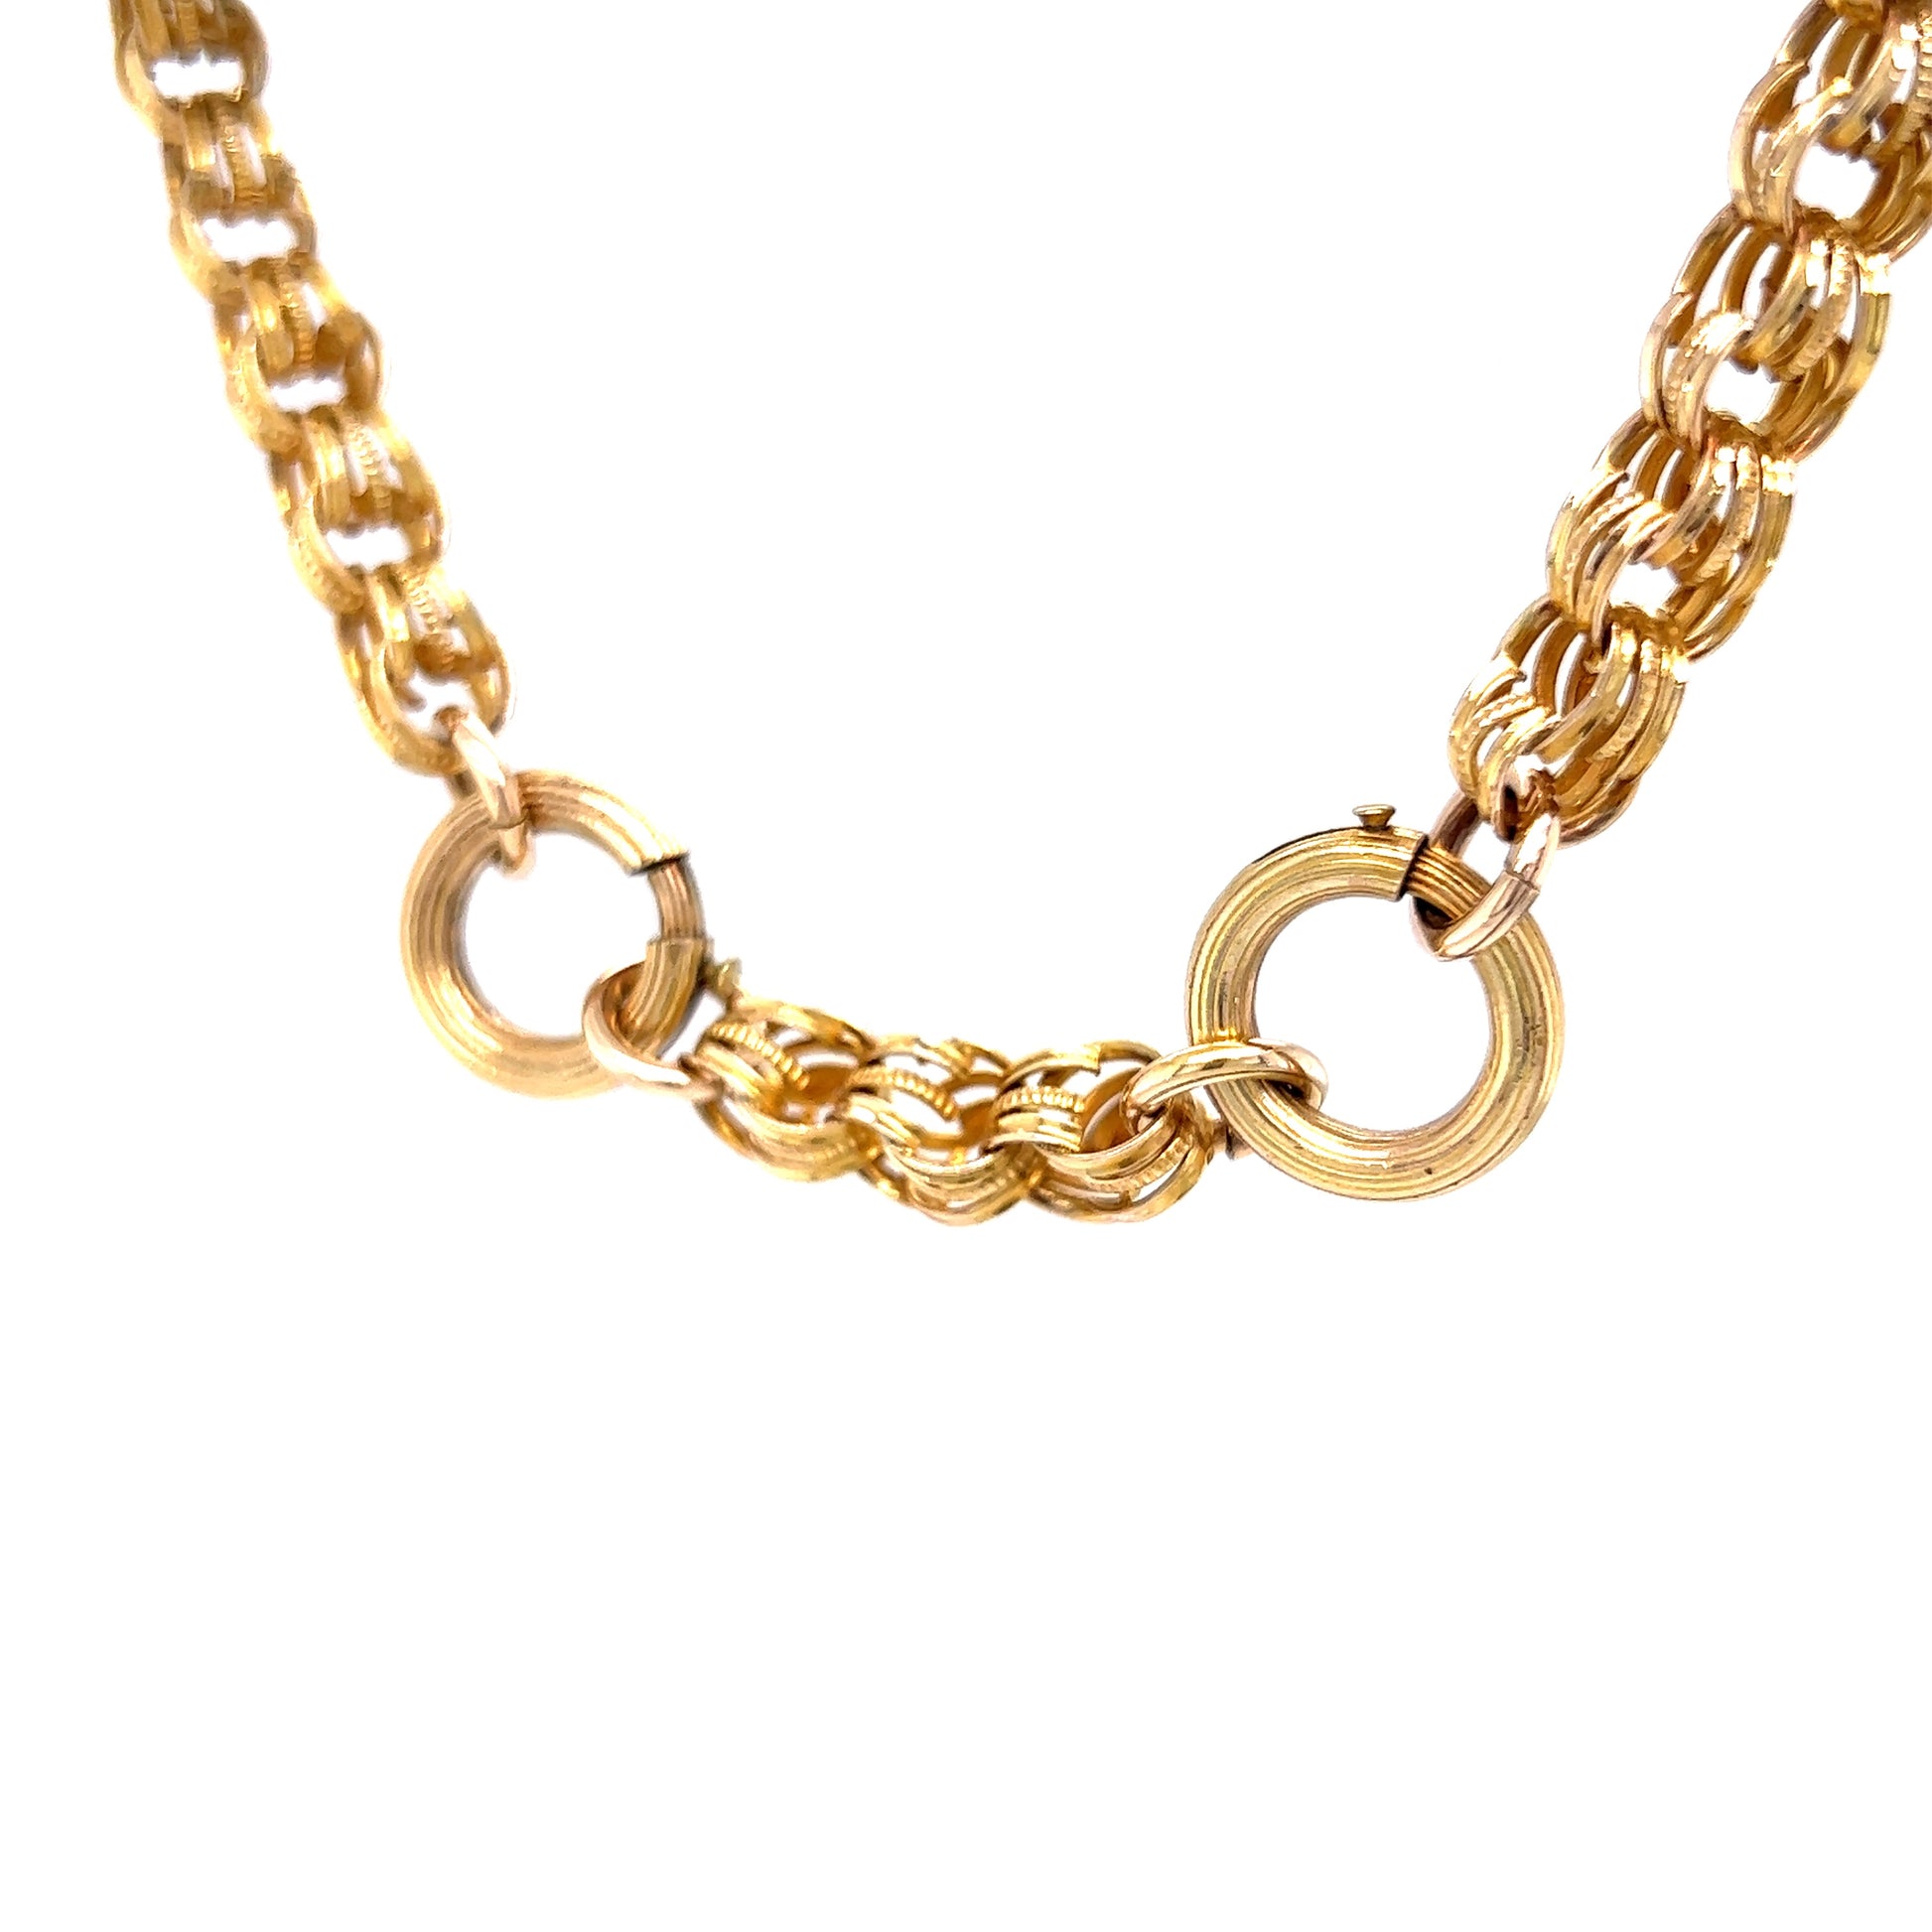 Vintage Victorian Rolo Link Chain Necklace in 9k Yellow GoldComposition: 9 Karat Yellow Gold Total Gram Weight: 30.2 g